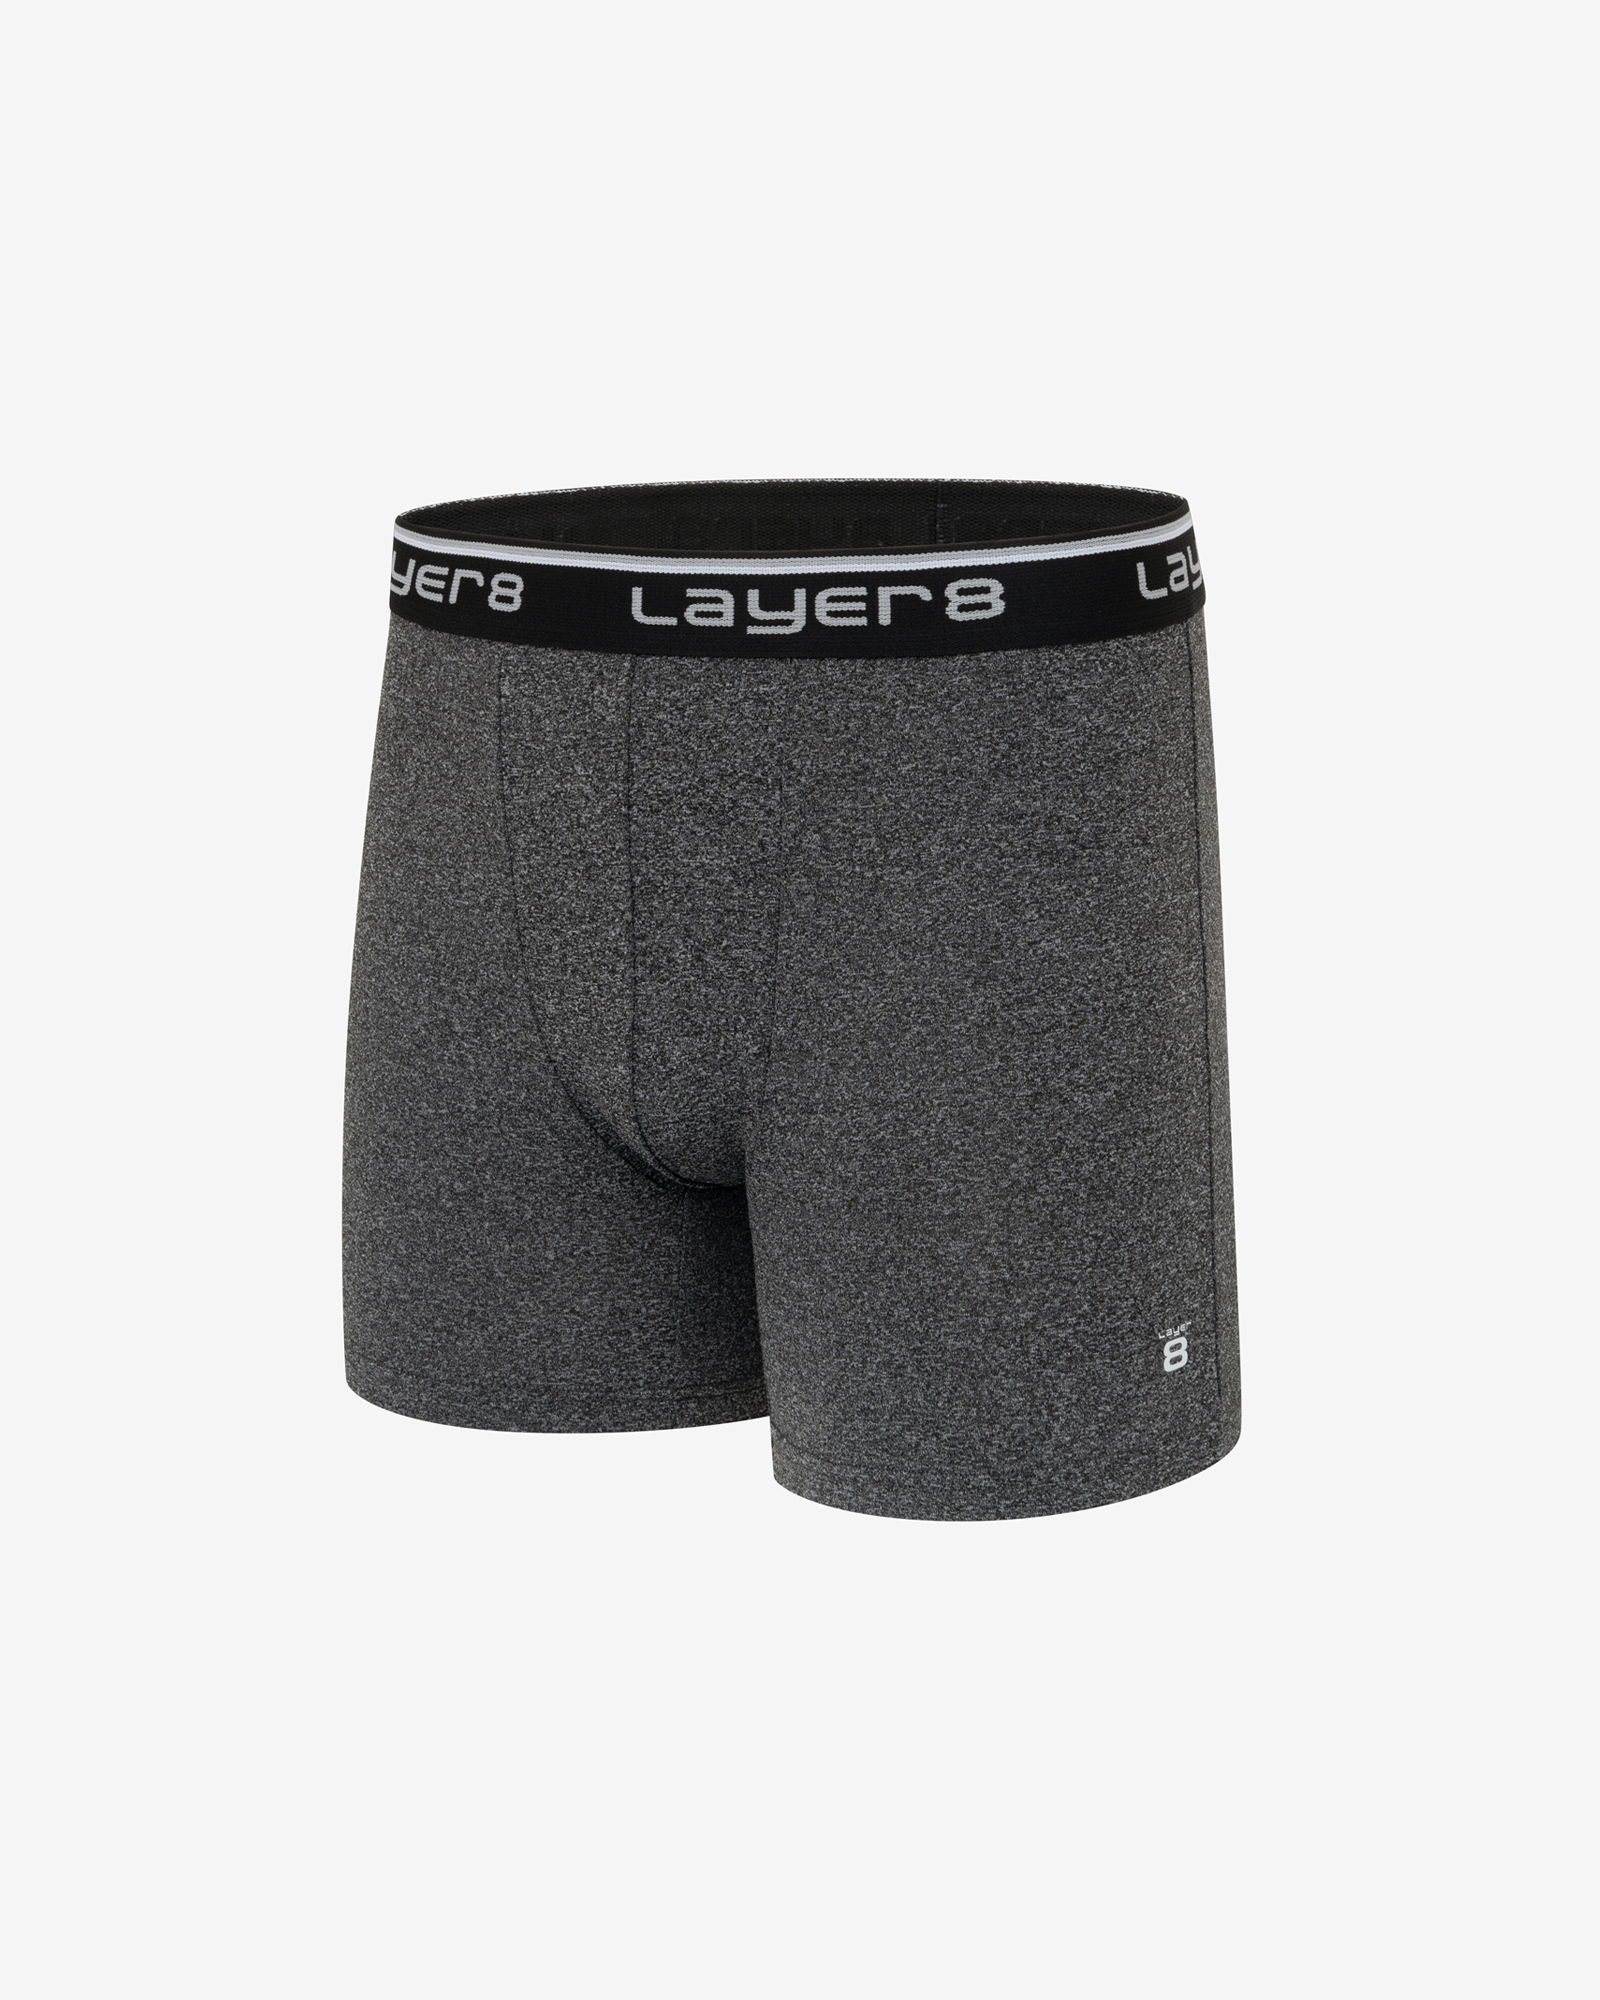 Layer 8 Mens 3 Pack Everyday Boxer Brief